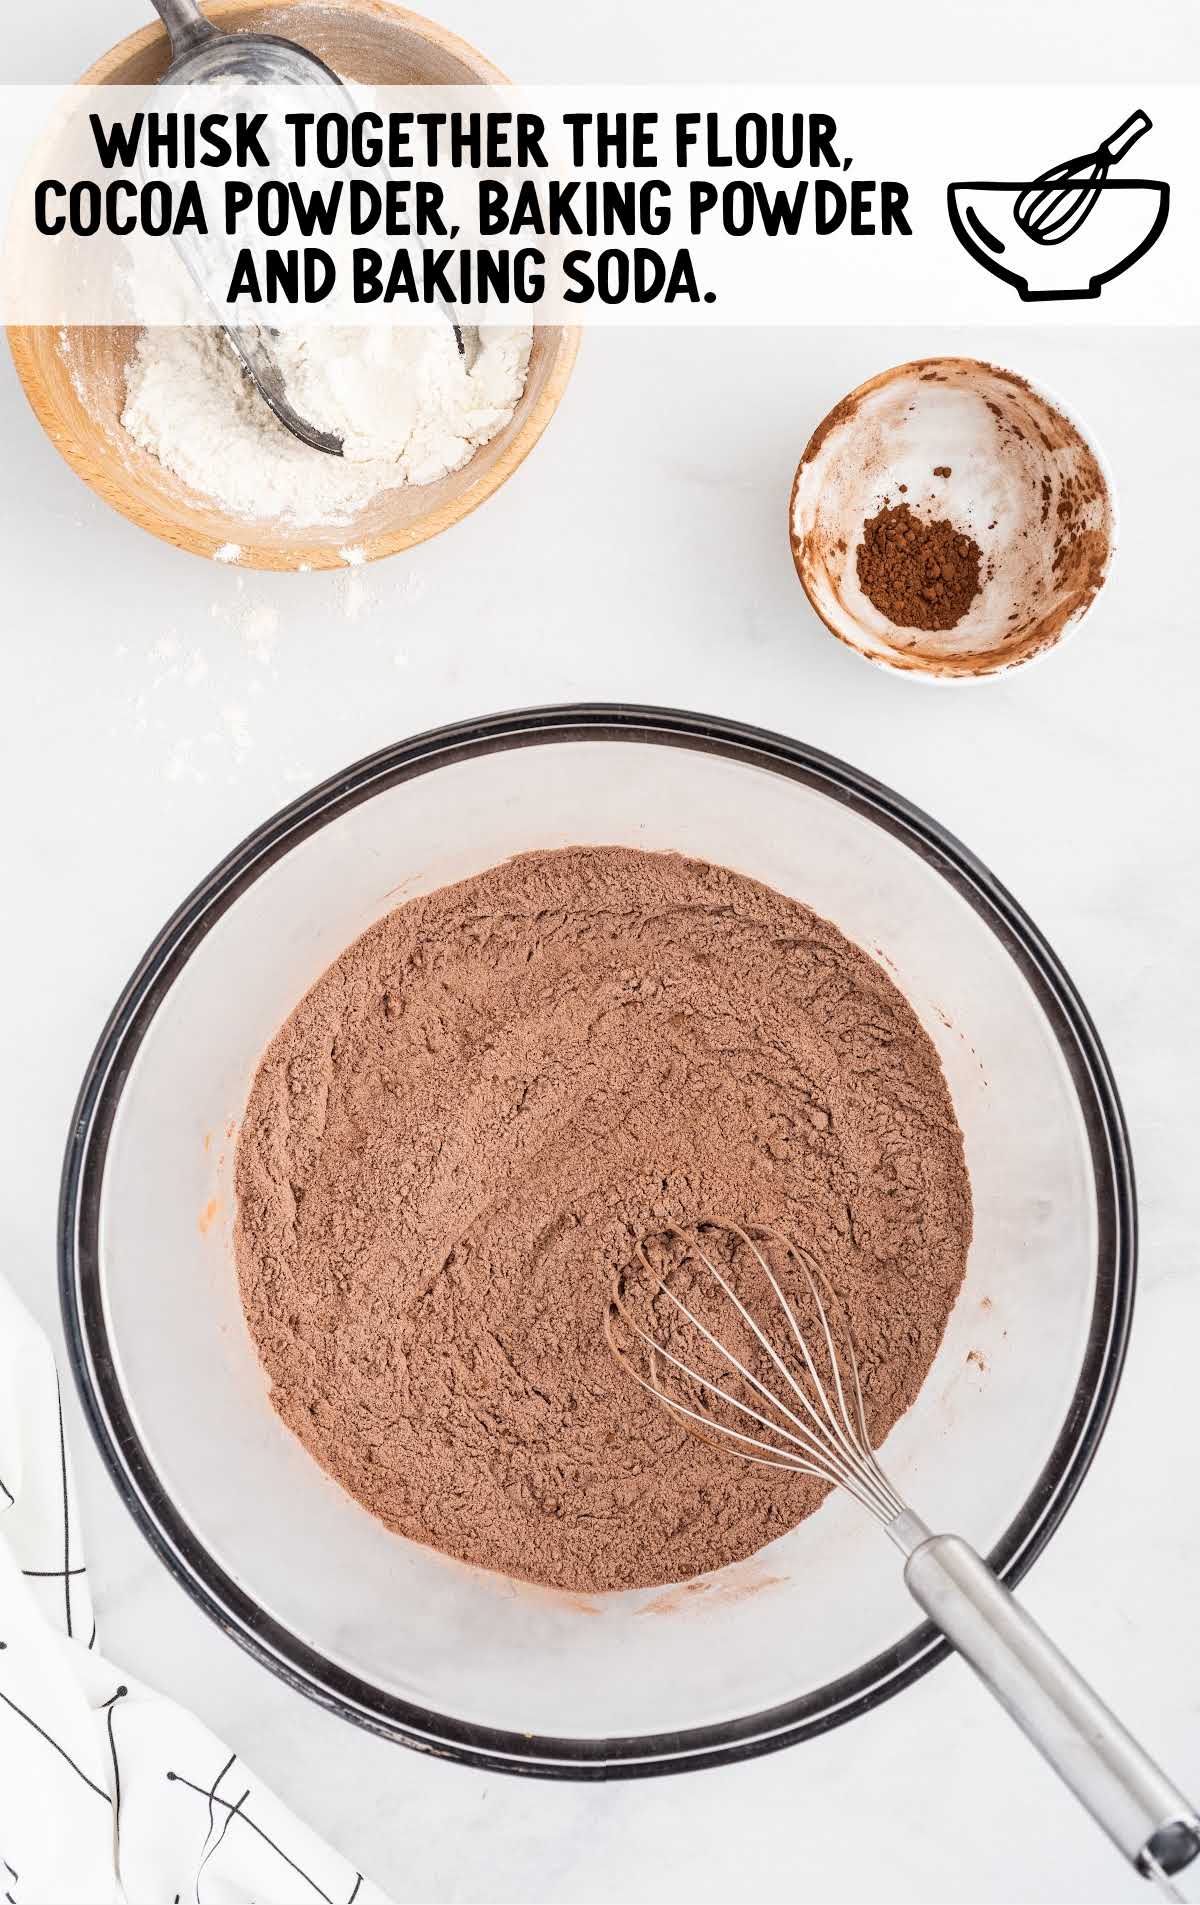 Chocolate Bread process shot of ingredients whisked together in a bowl